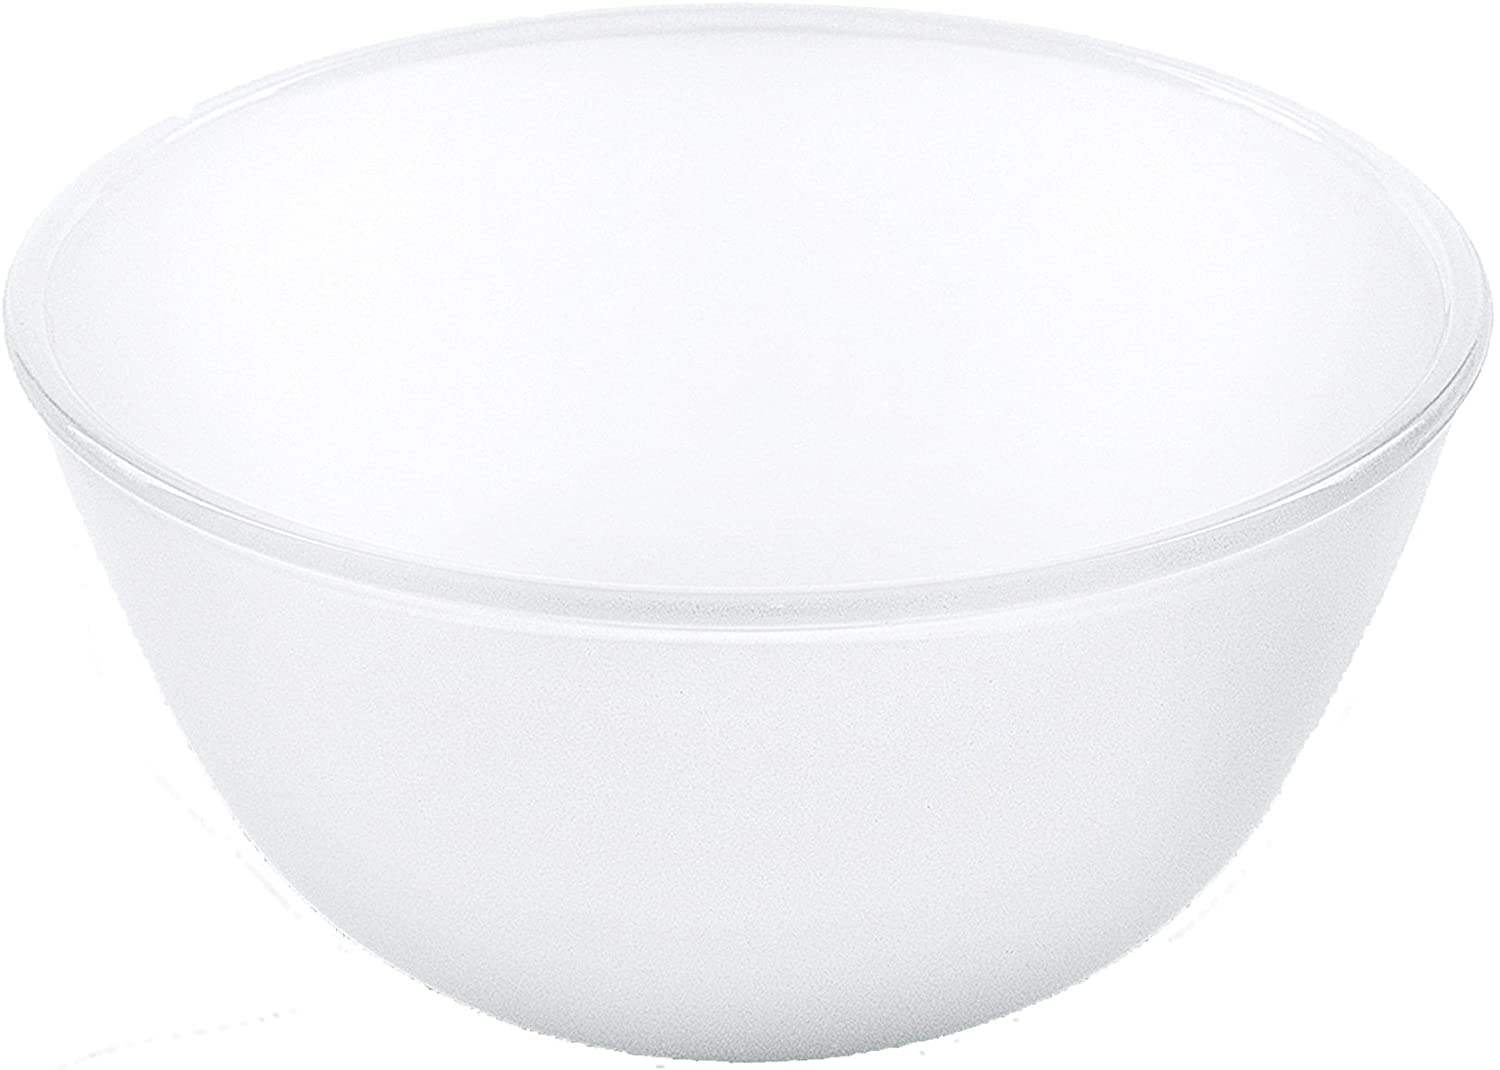 Bohemia Cristal Play of Colours Approx. 1.7 Ltr White Cooking Bowl Made of Borosilicate Glass, Glass Bowl, 10.3 X 21 X 10.3 cm